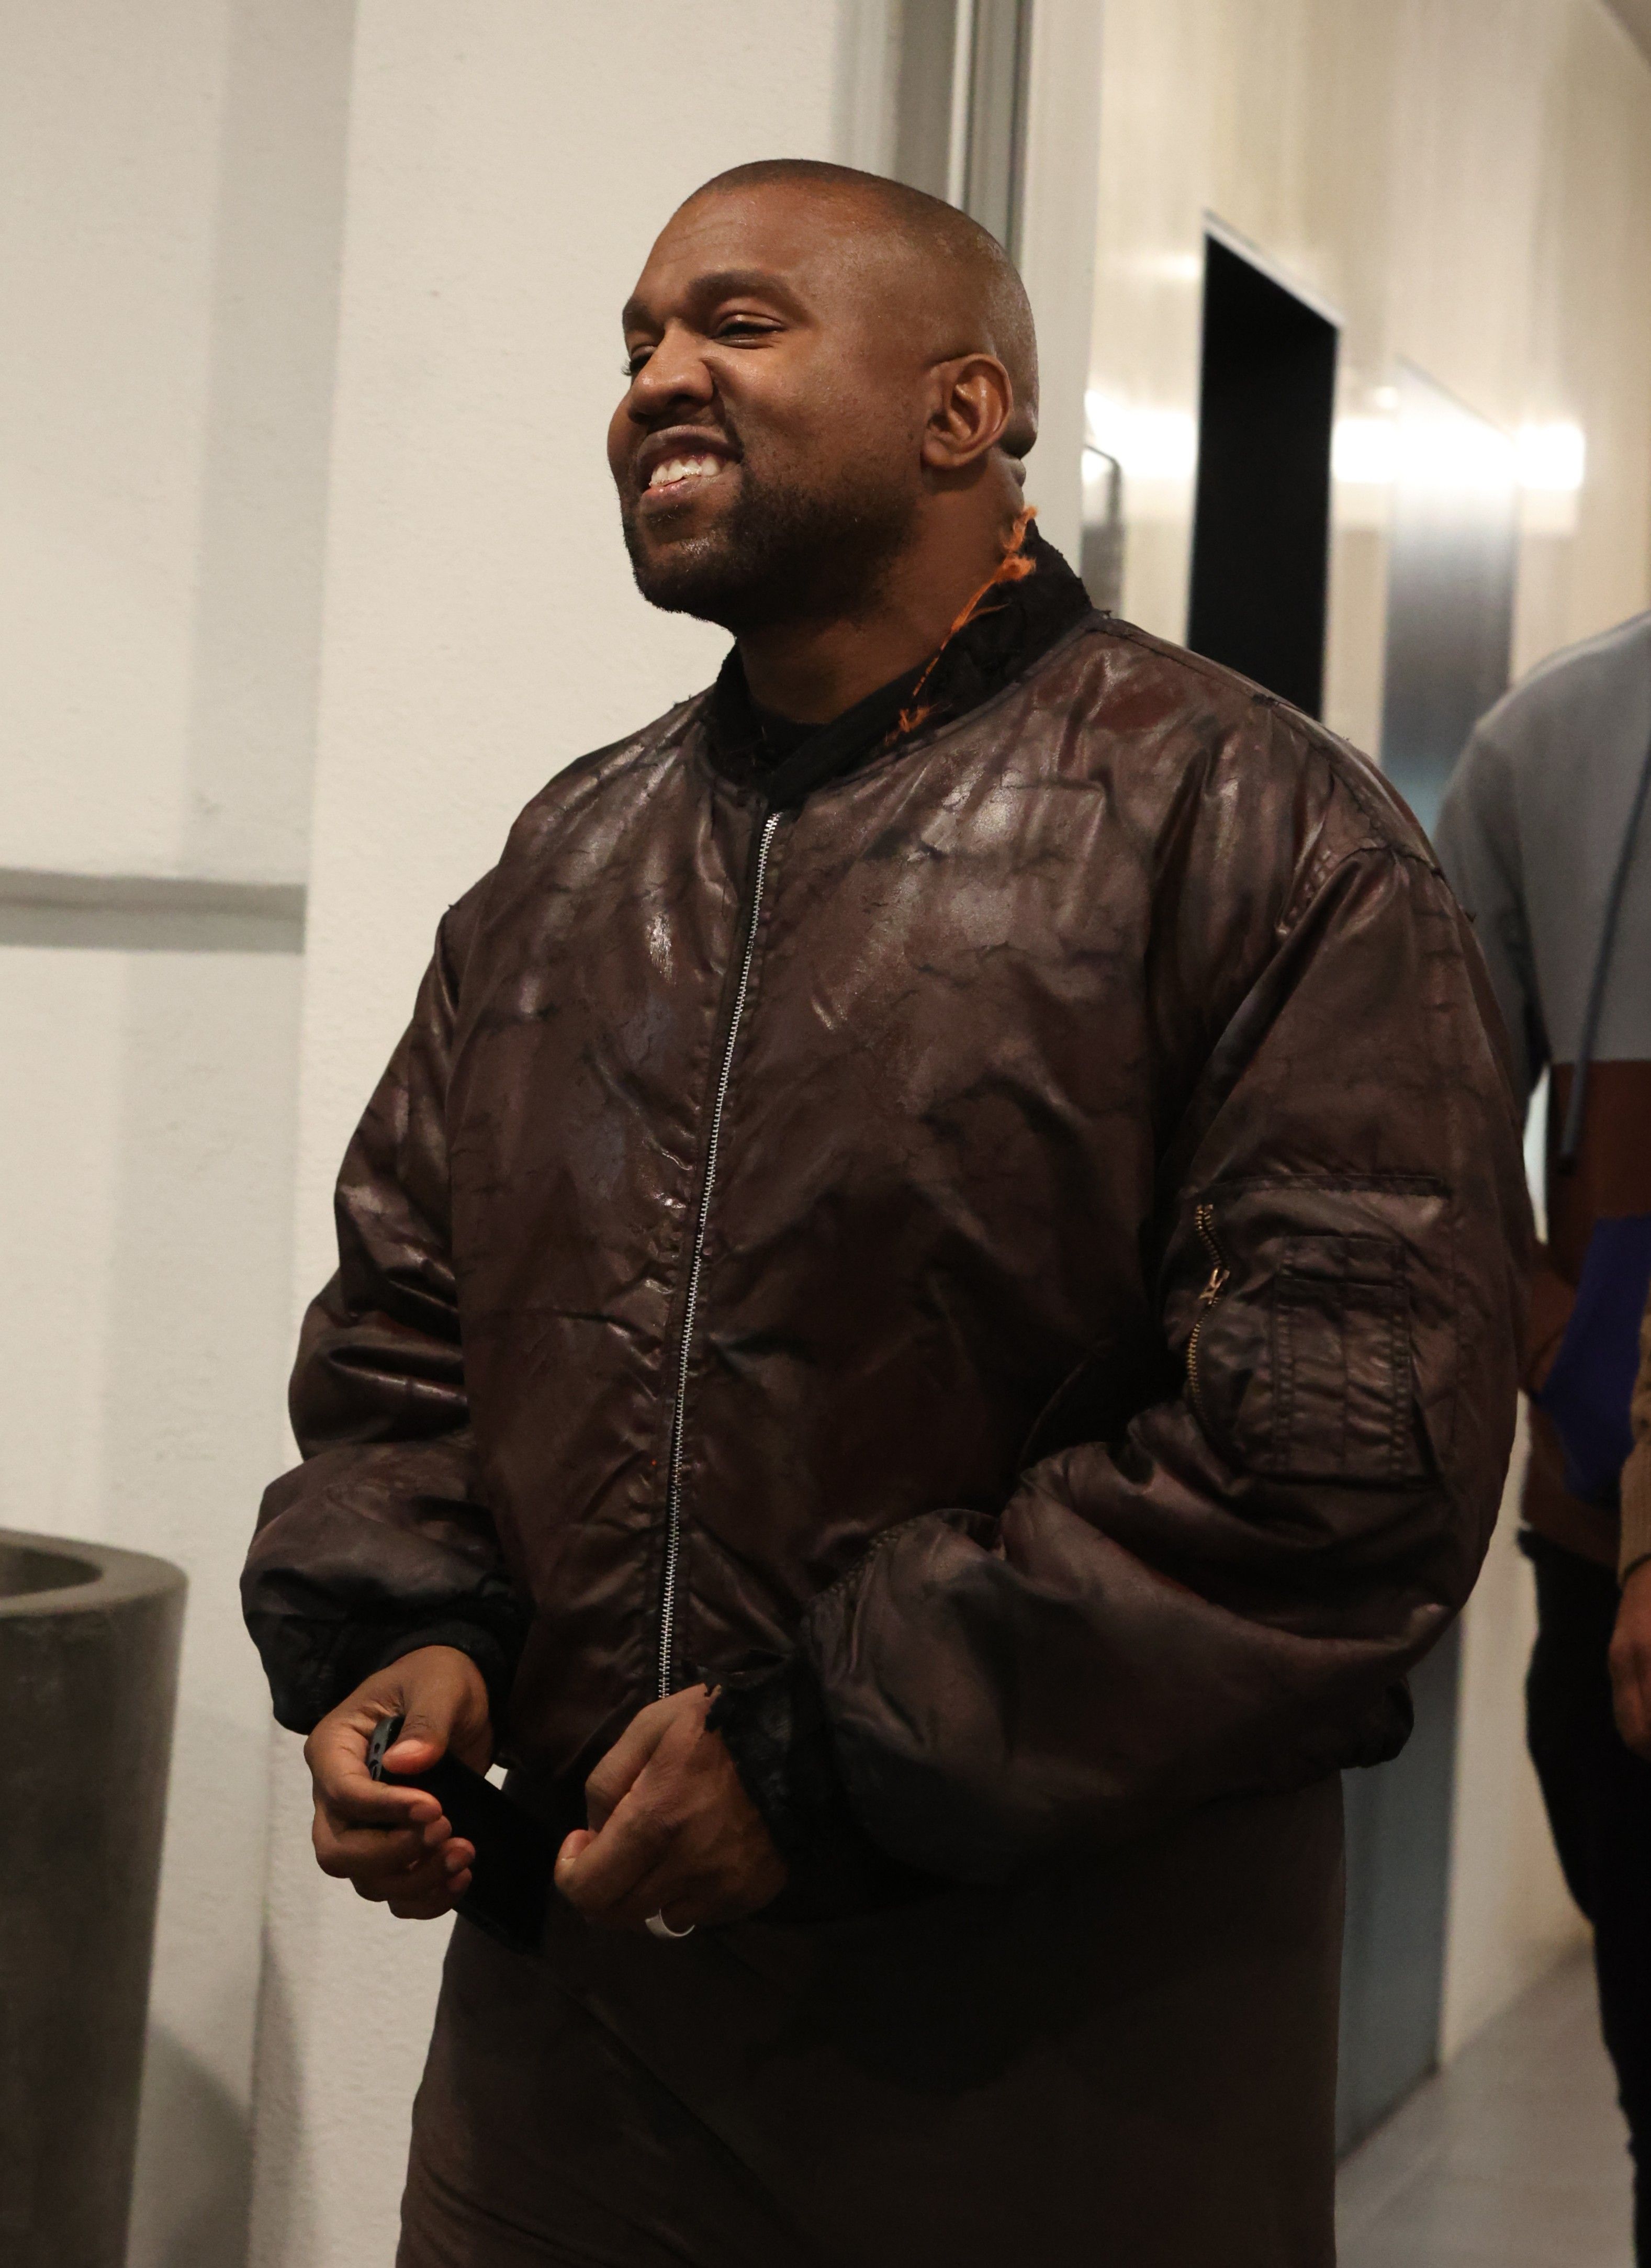 Kanye West’s path to power: A troubling journey of hate and political aspirations